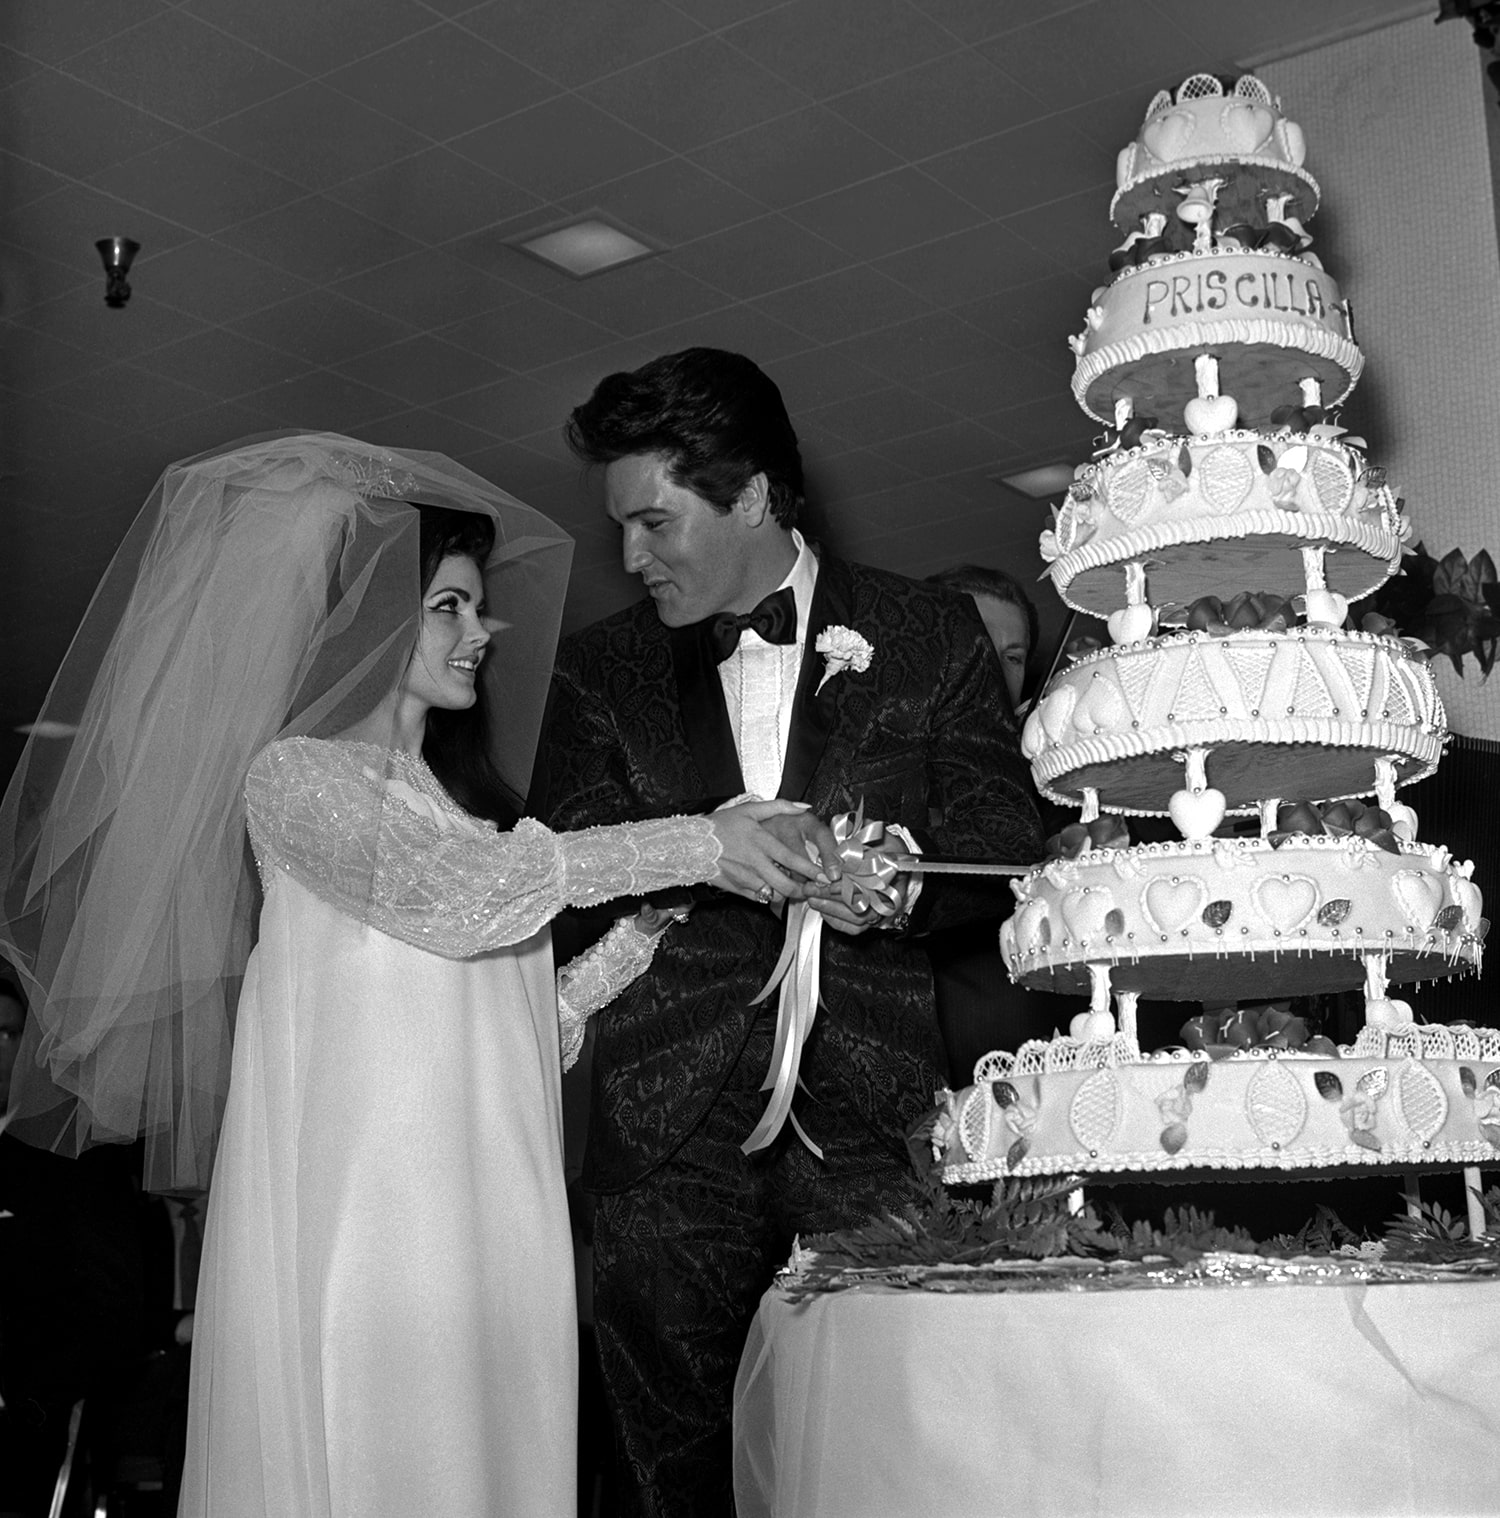 Elvis and Priscilla Presley getting married at Aladdin hotel in vegas